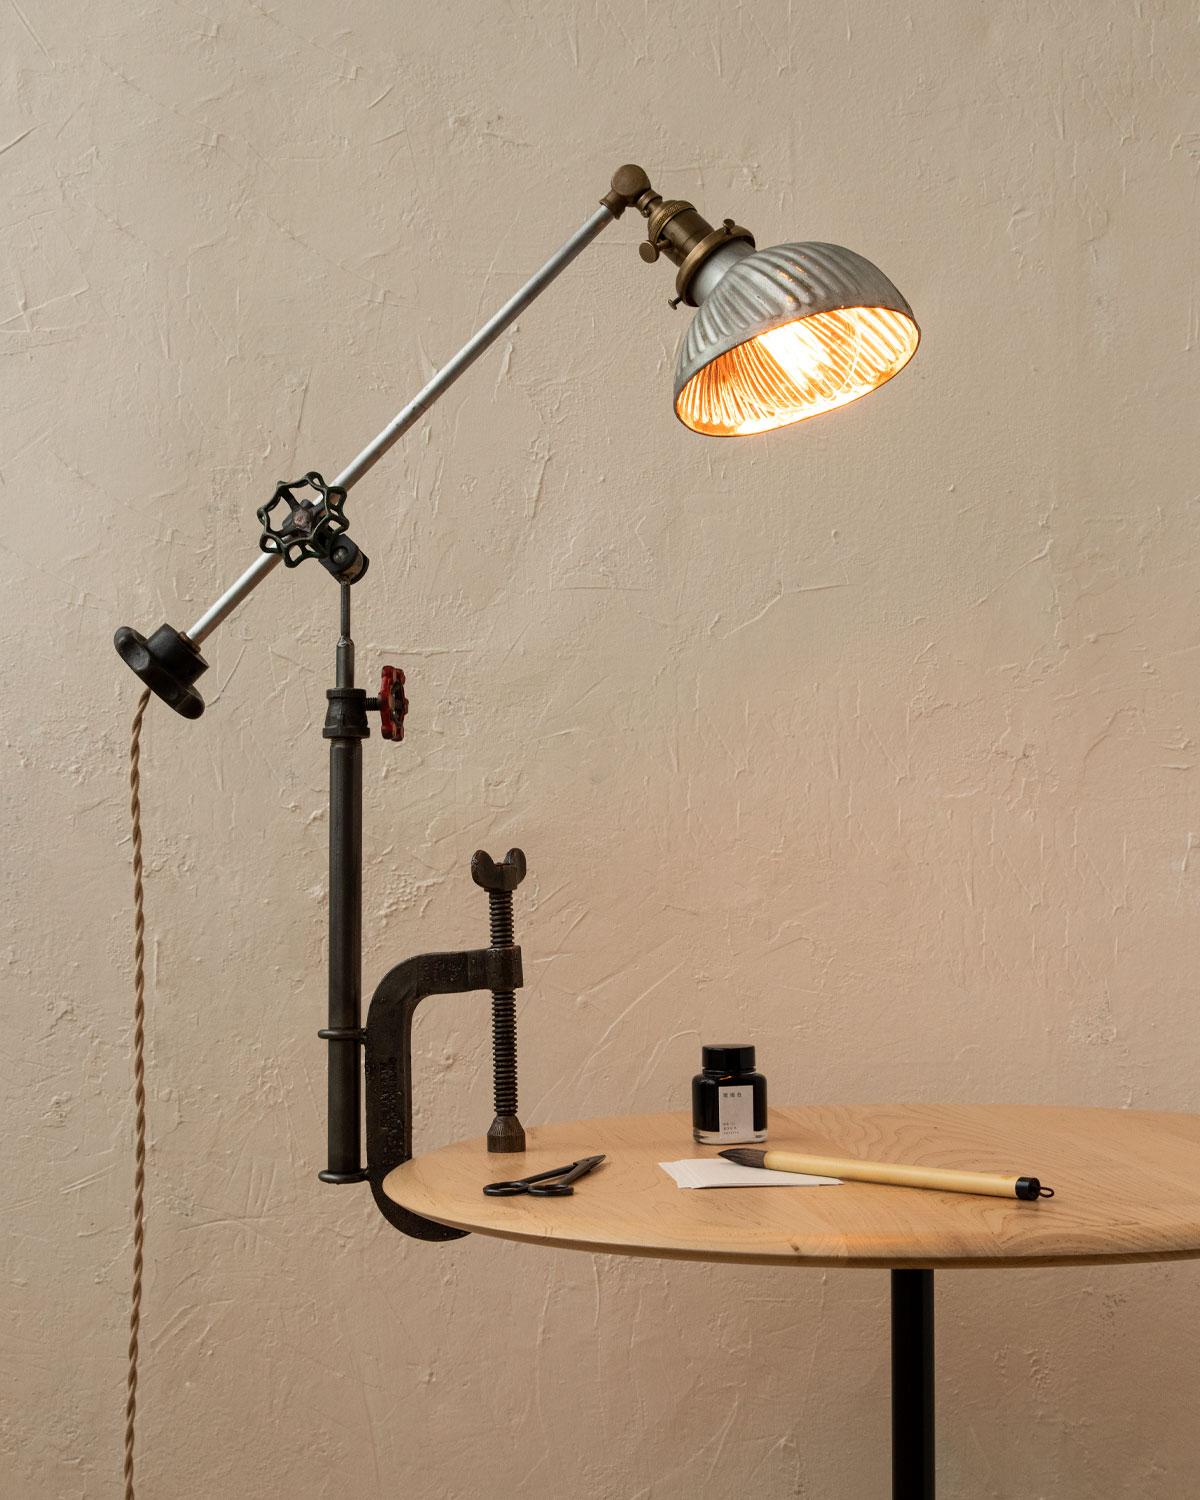 Robert True Ogden's one-of-a-like Found Object Lamps are made by hand in Philadelphia. Crafted from pieces and parts sourced locally and abroad, no two lamps are alike. 

This clamp lamp has a vintage asymmetrical painted glass shade with a